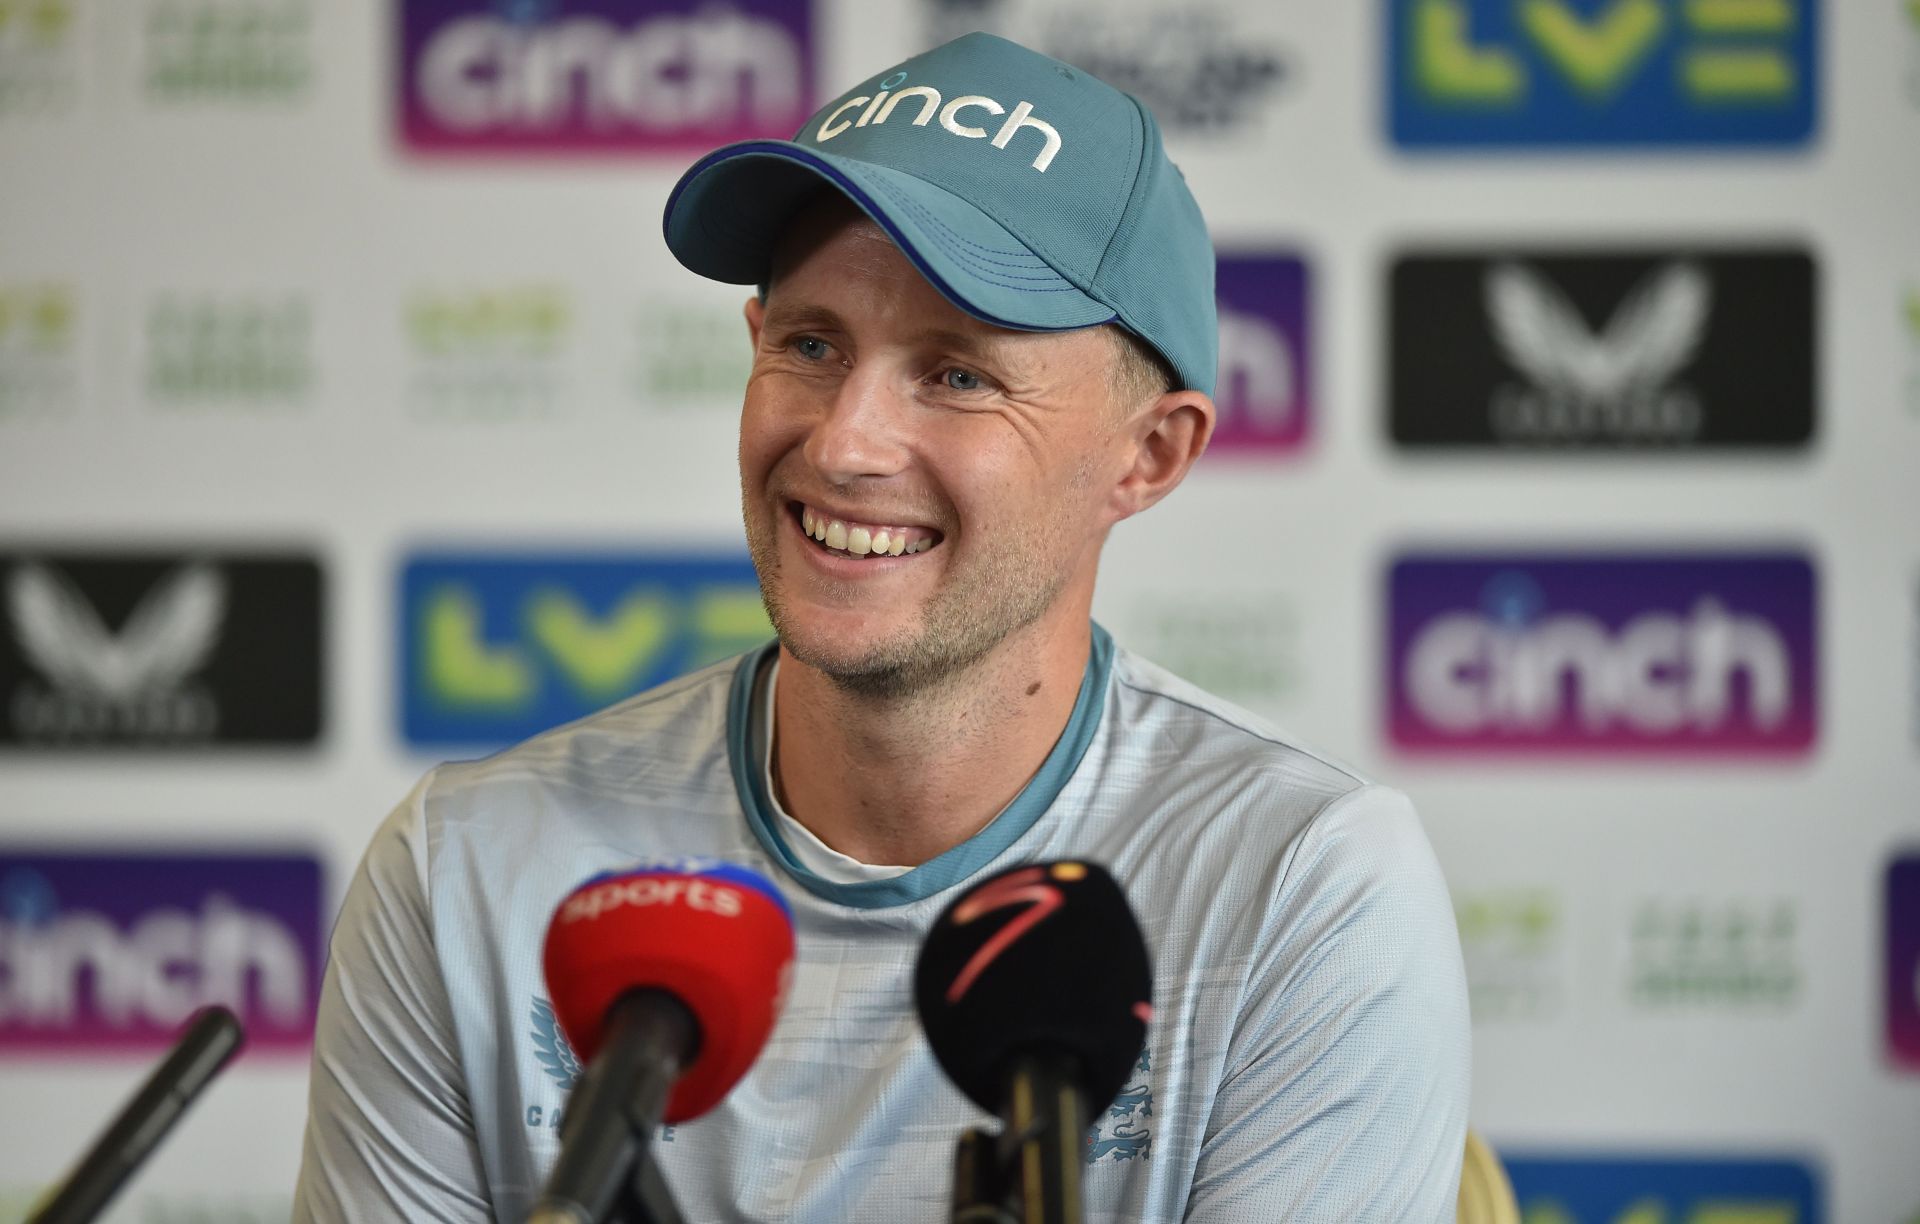 Joe Root would be keen to contribute in the second Test. (Credits: Getty Images)